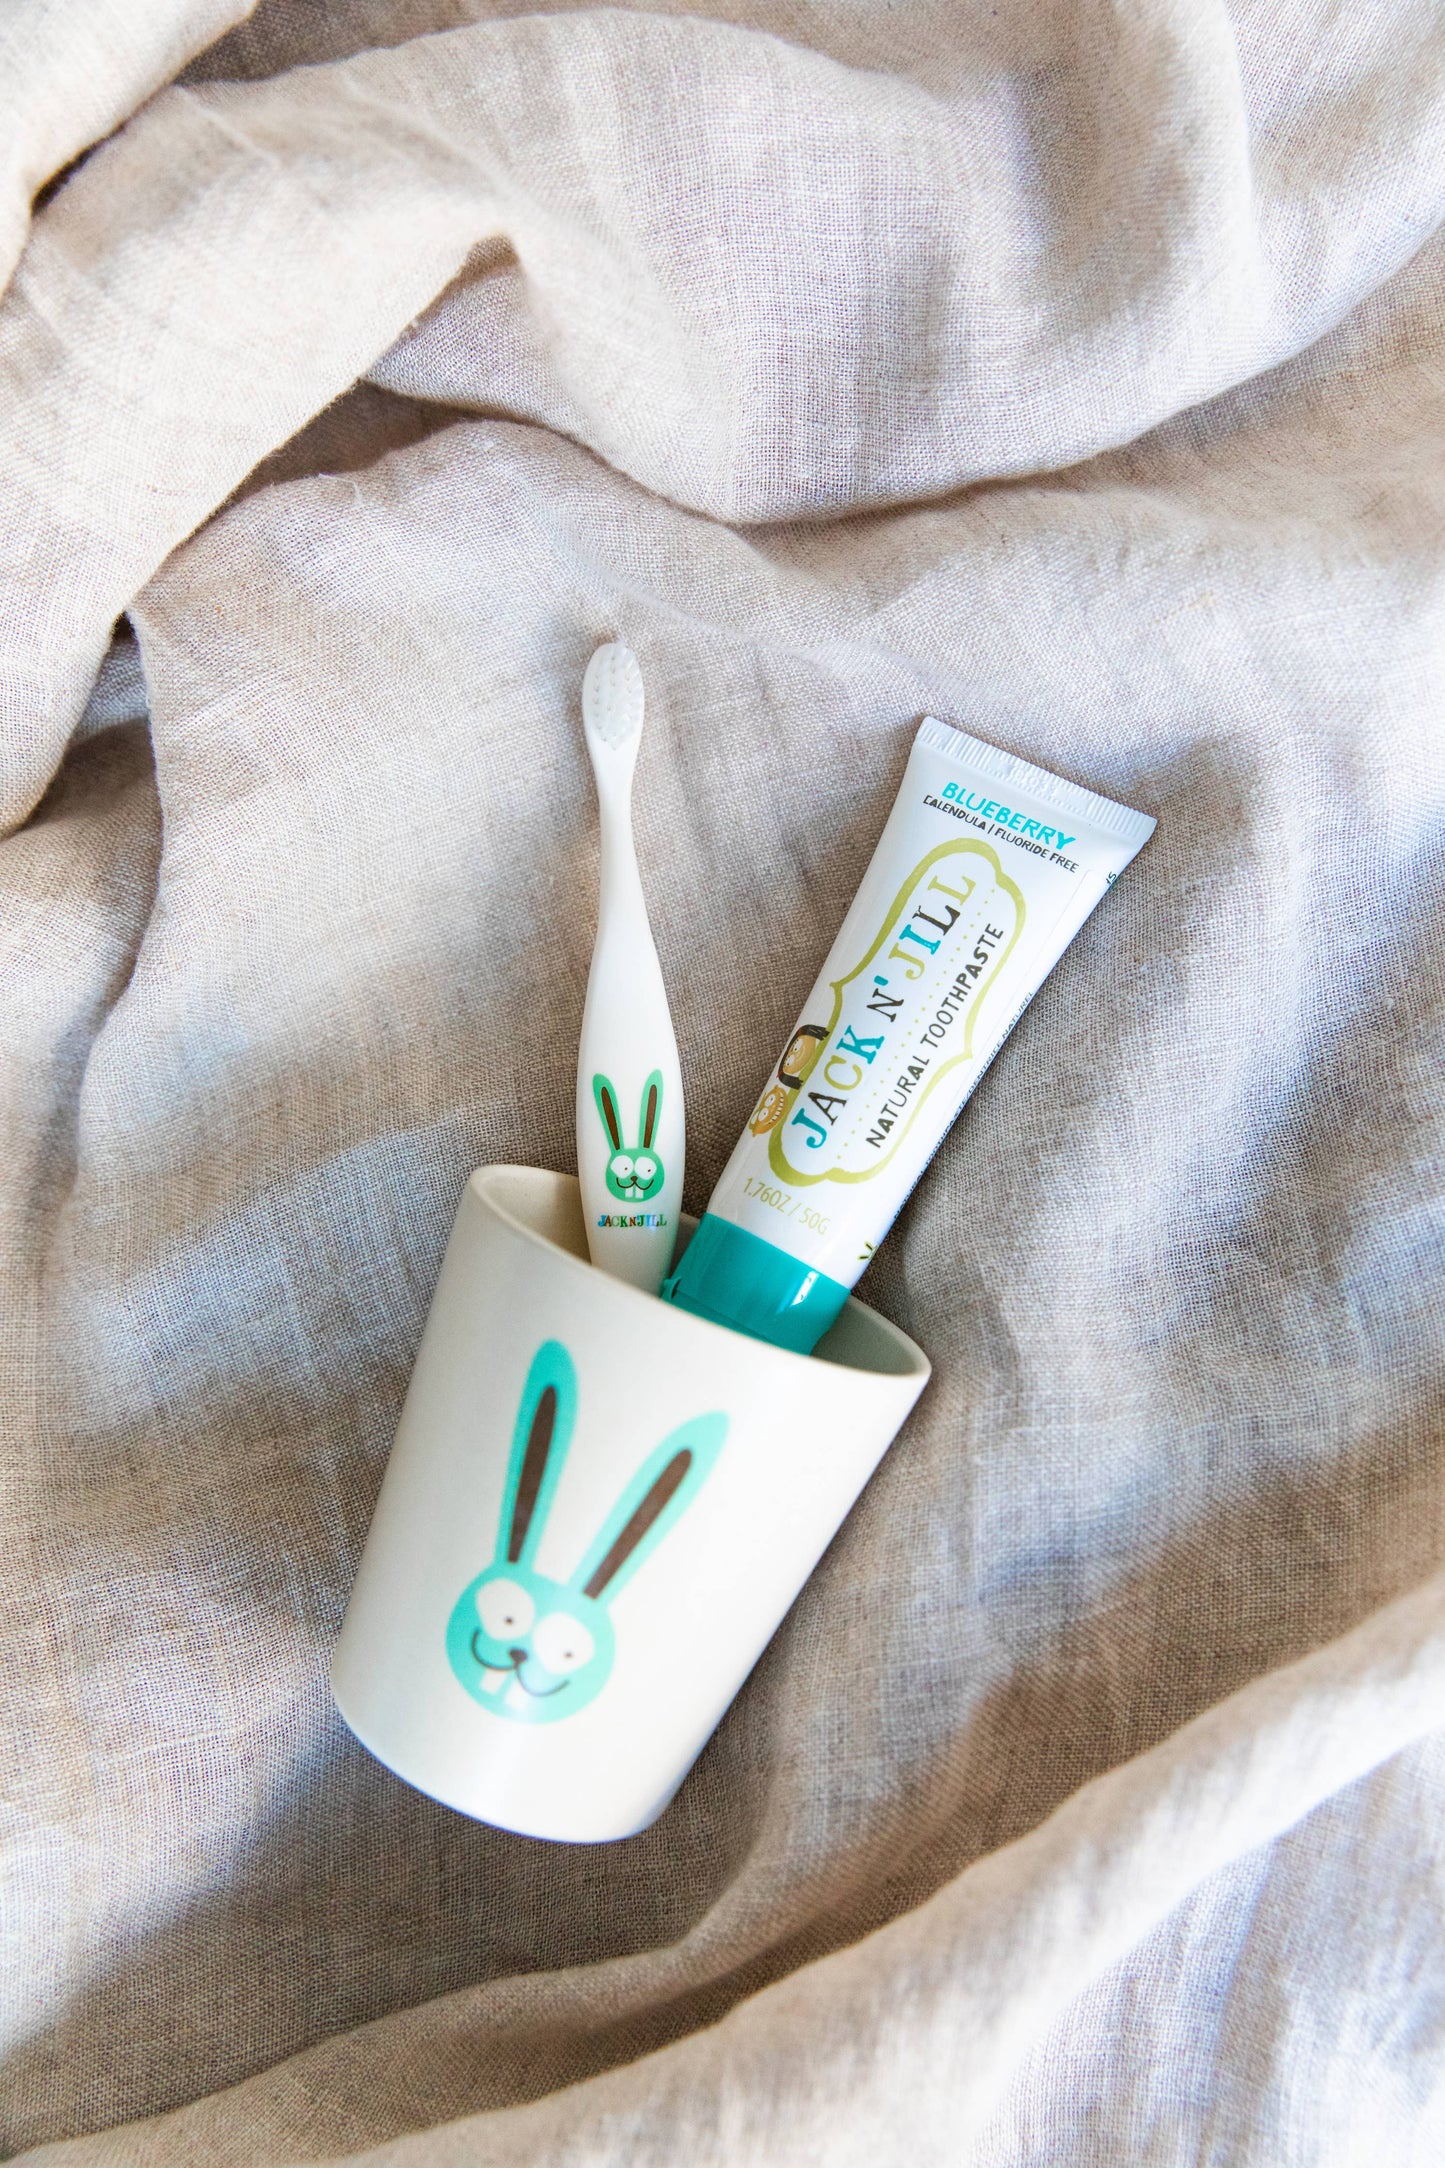 Blueberry Jack N' Jill Natural Toothpaste